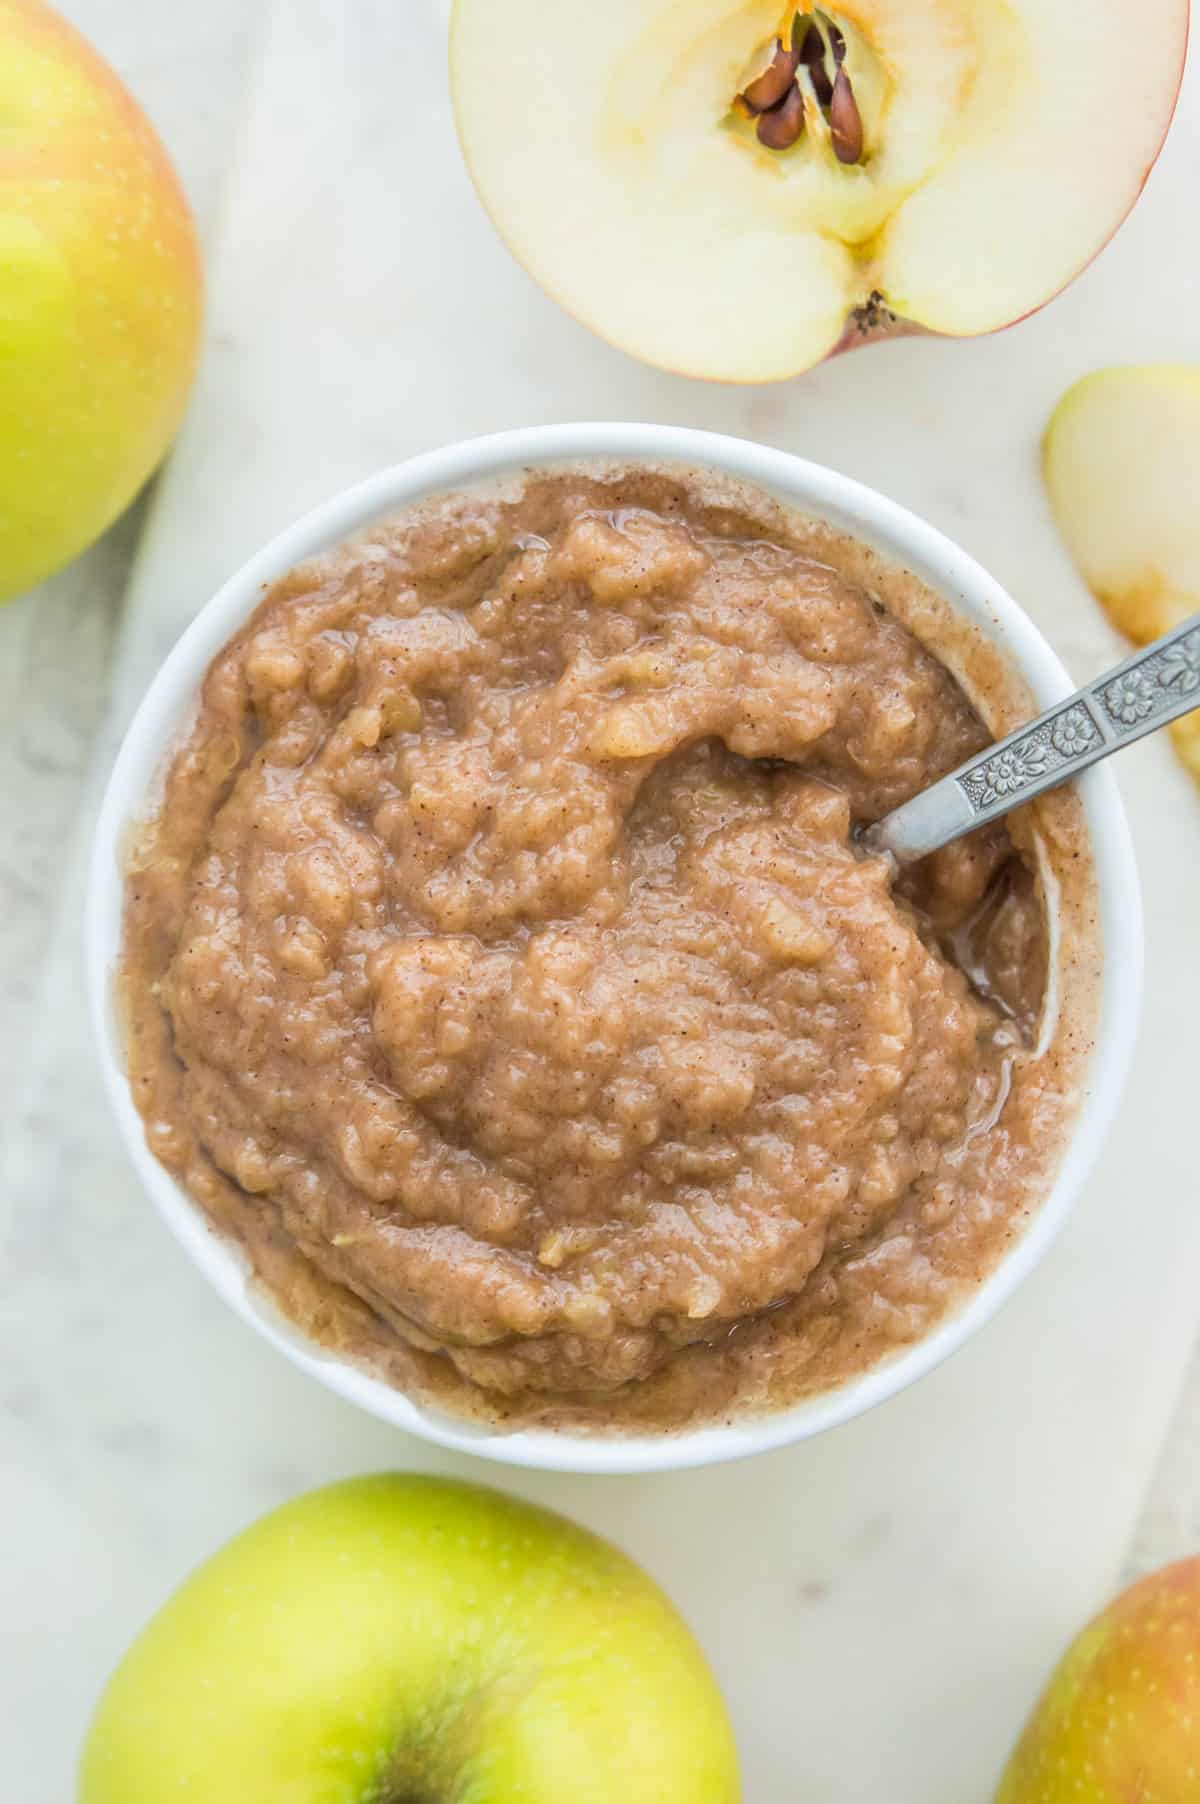 A bowl of homemade sugar free applesauce with a spoon in it.